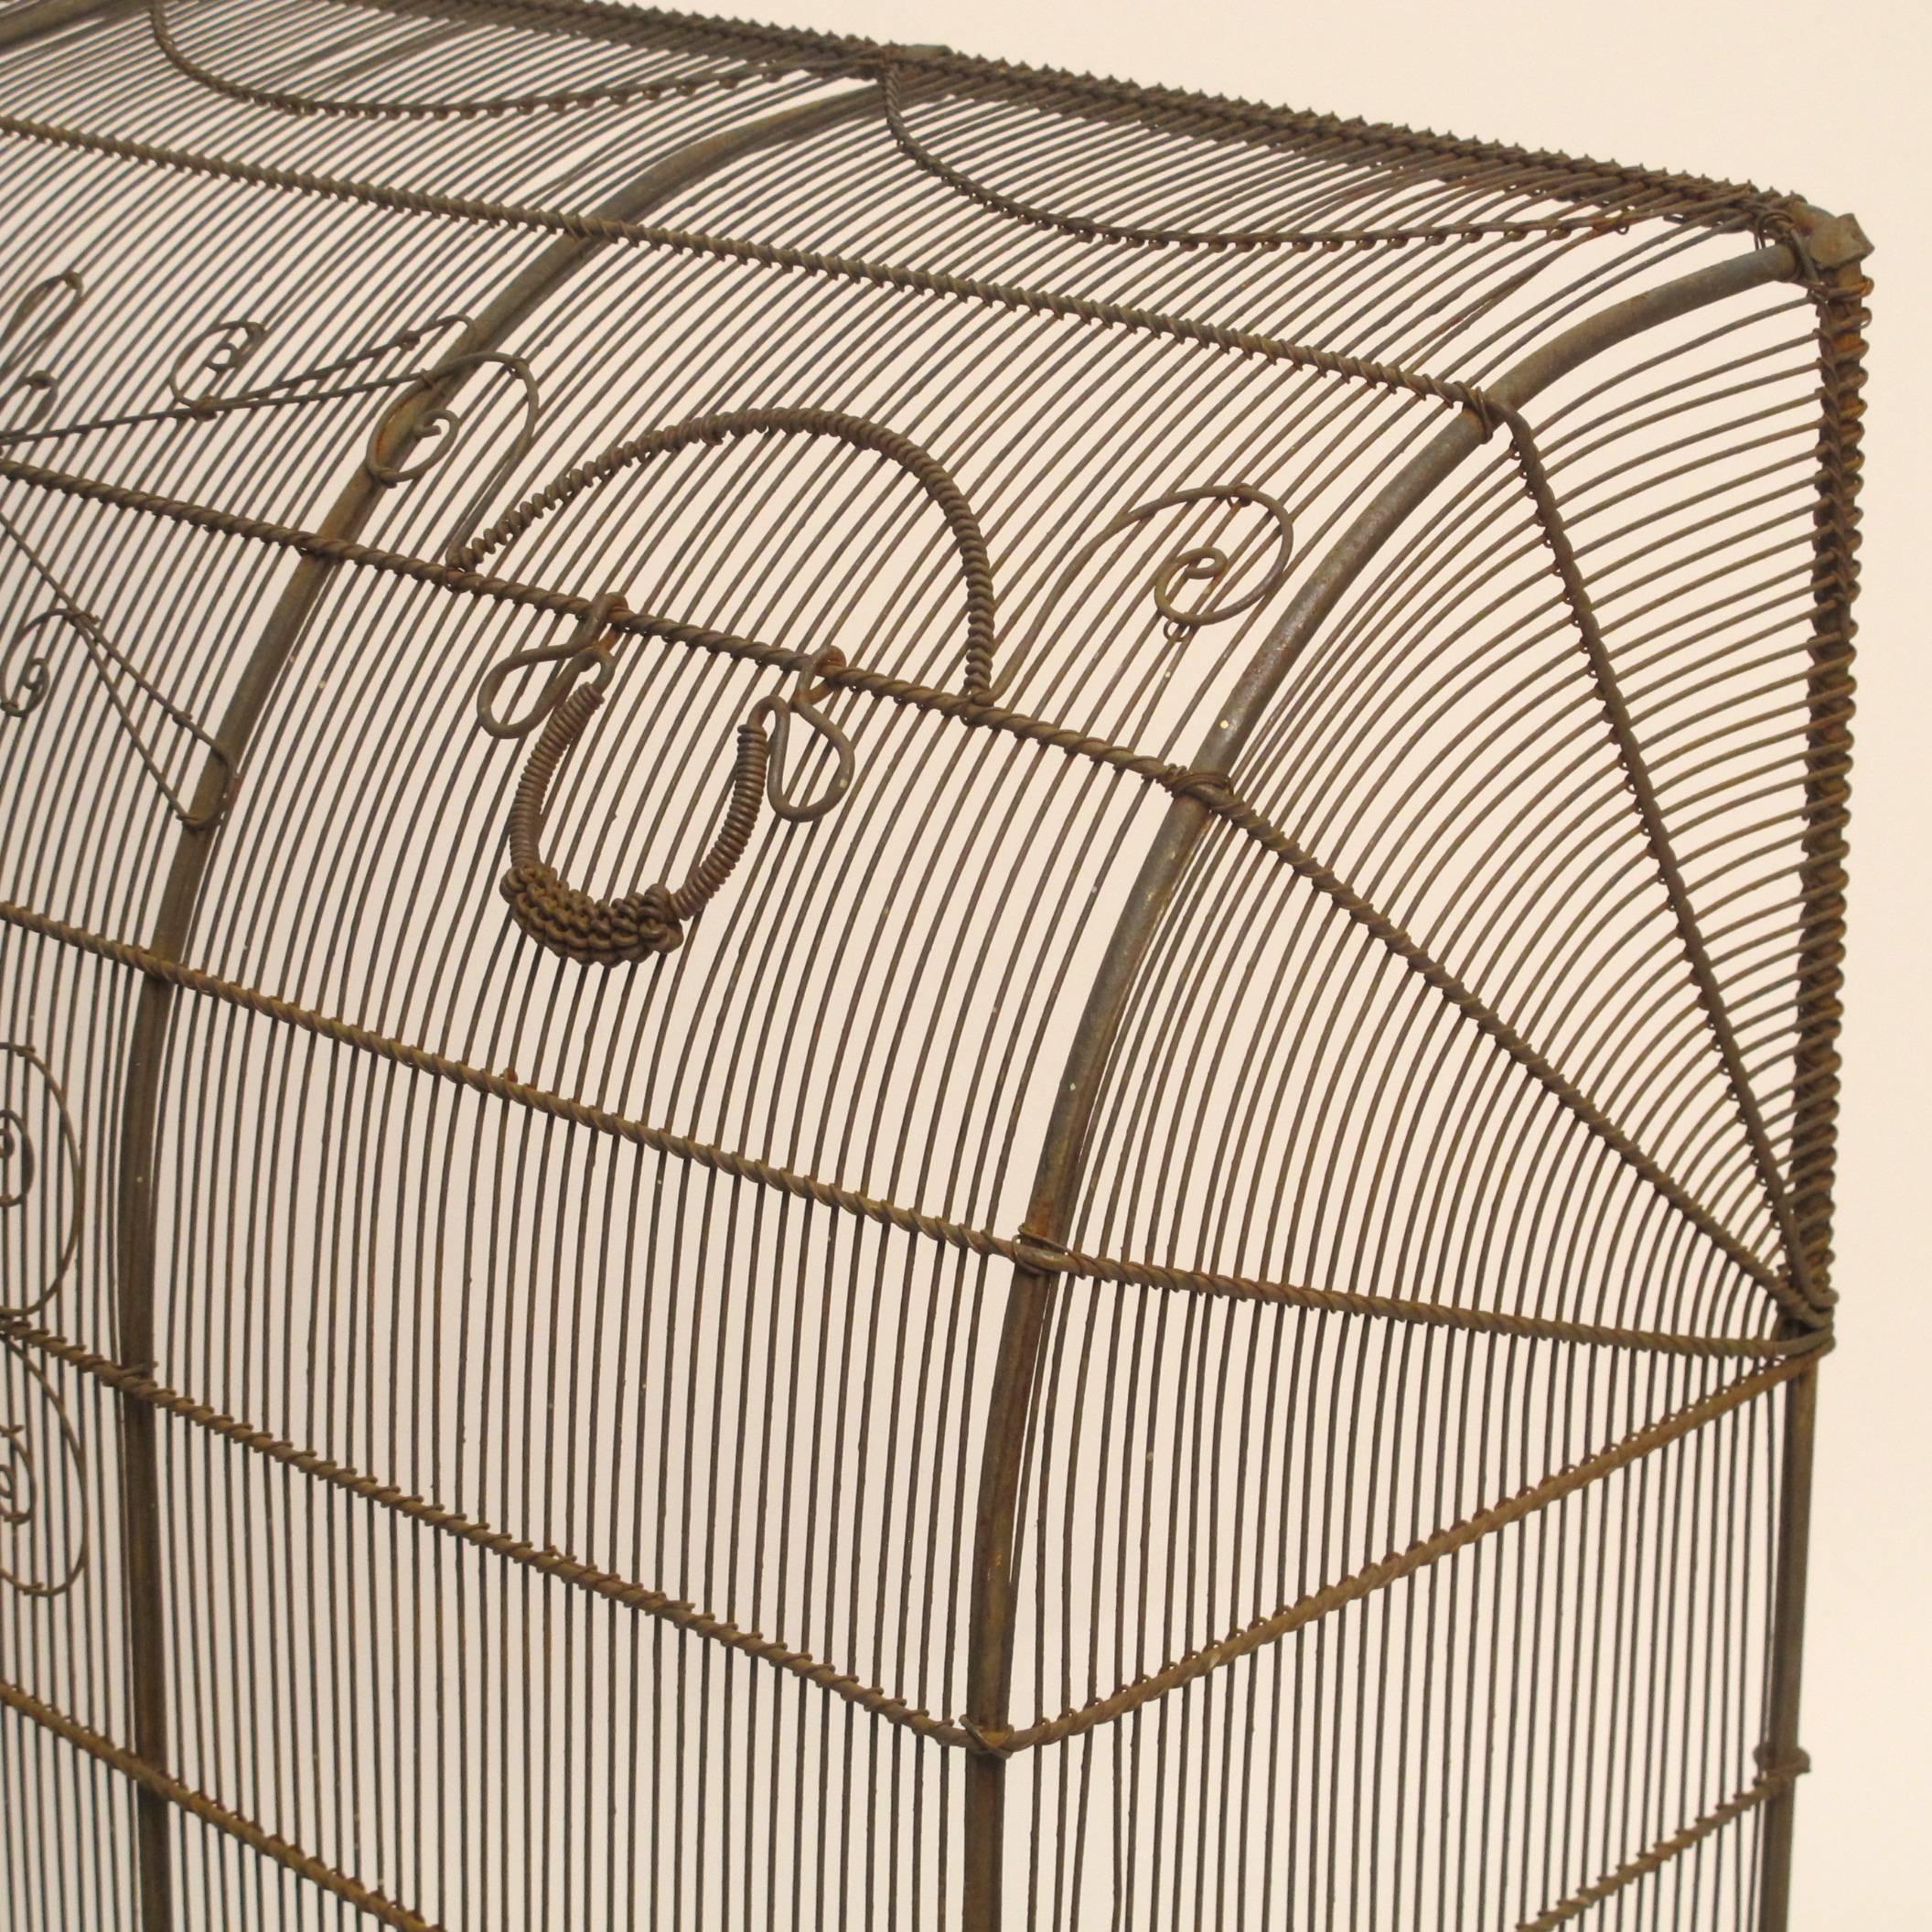 Metal 19th Century American Wire Fireplace Screen